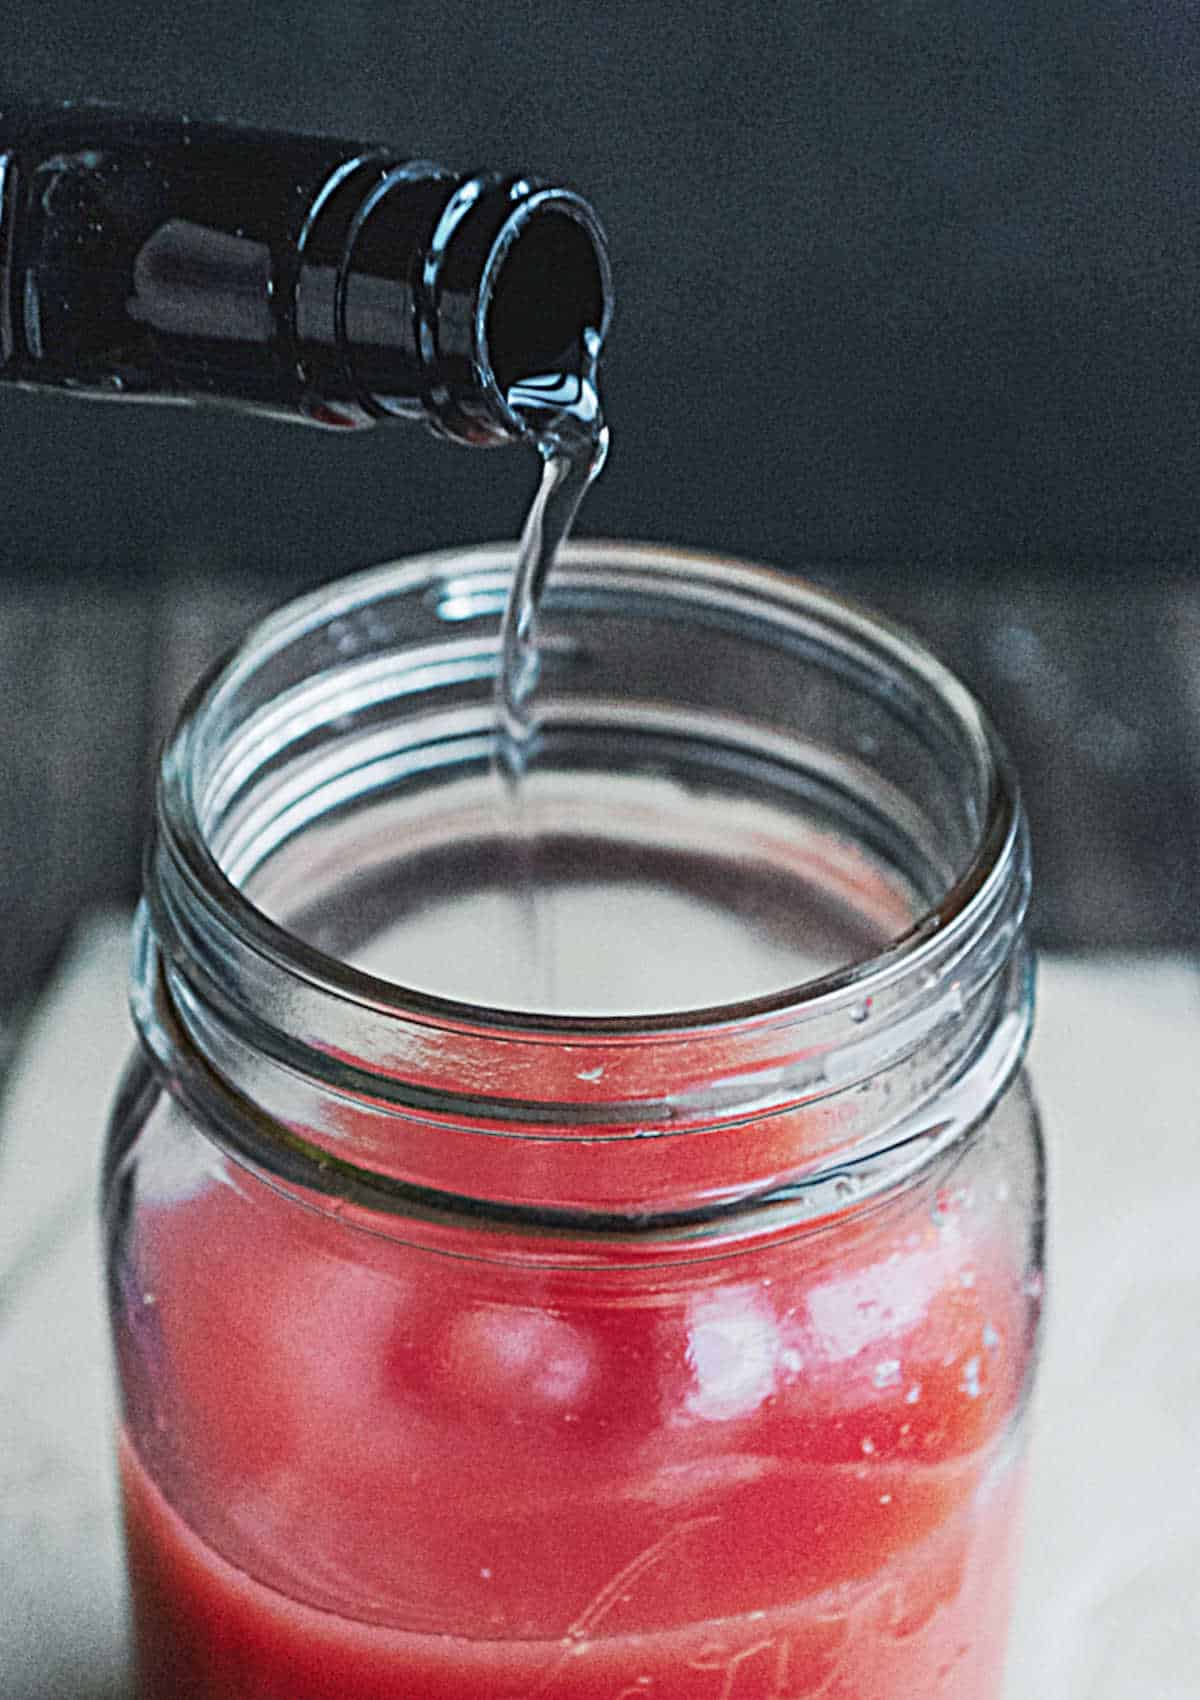 Glass mason jar with cranberry juice. Vodka being poured into it. White surface and black background.